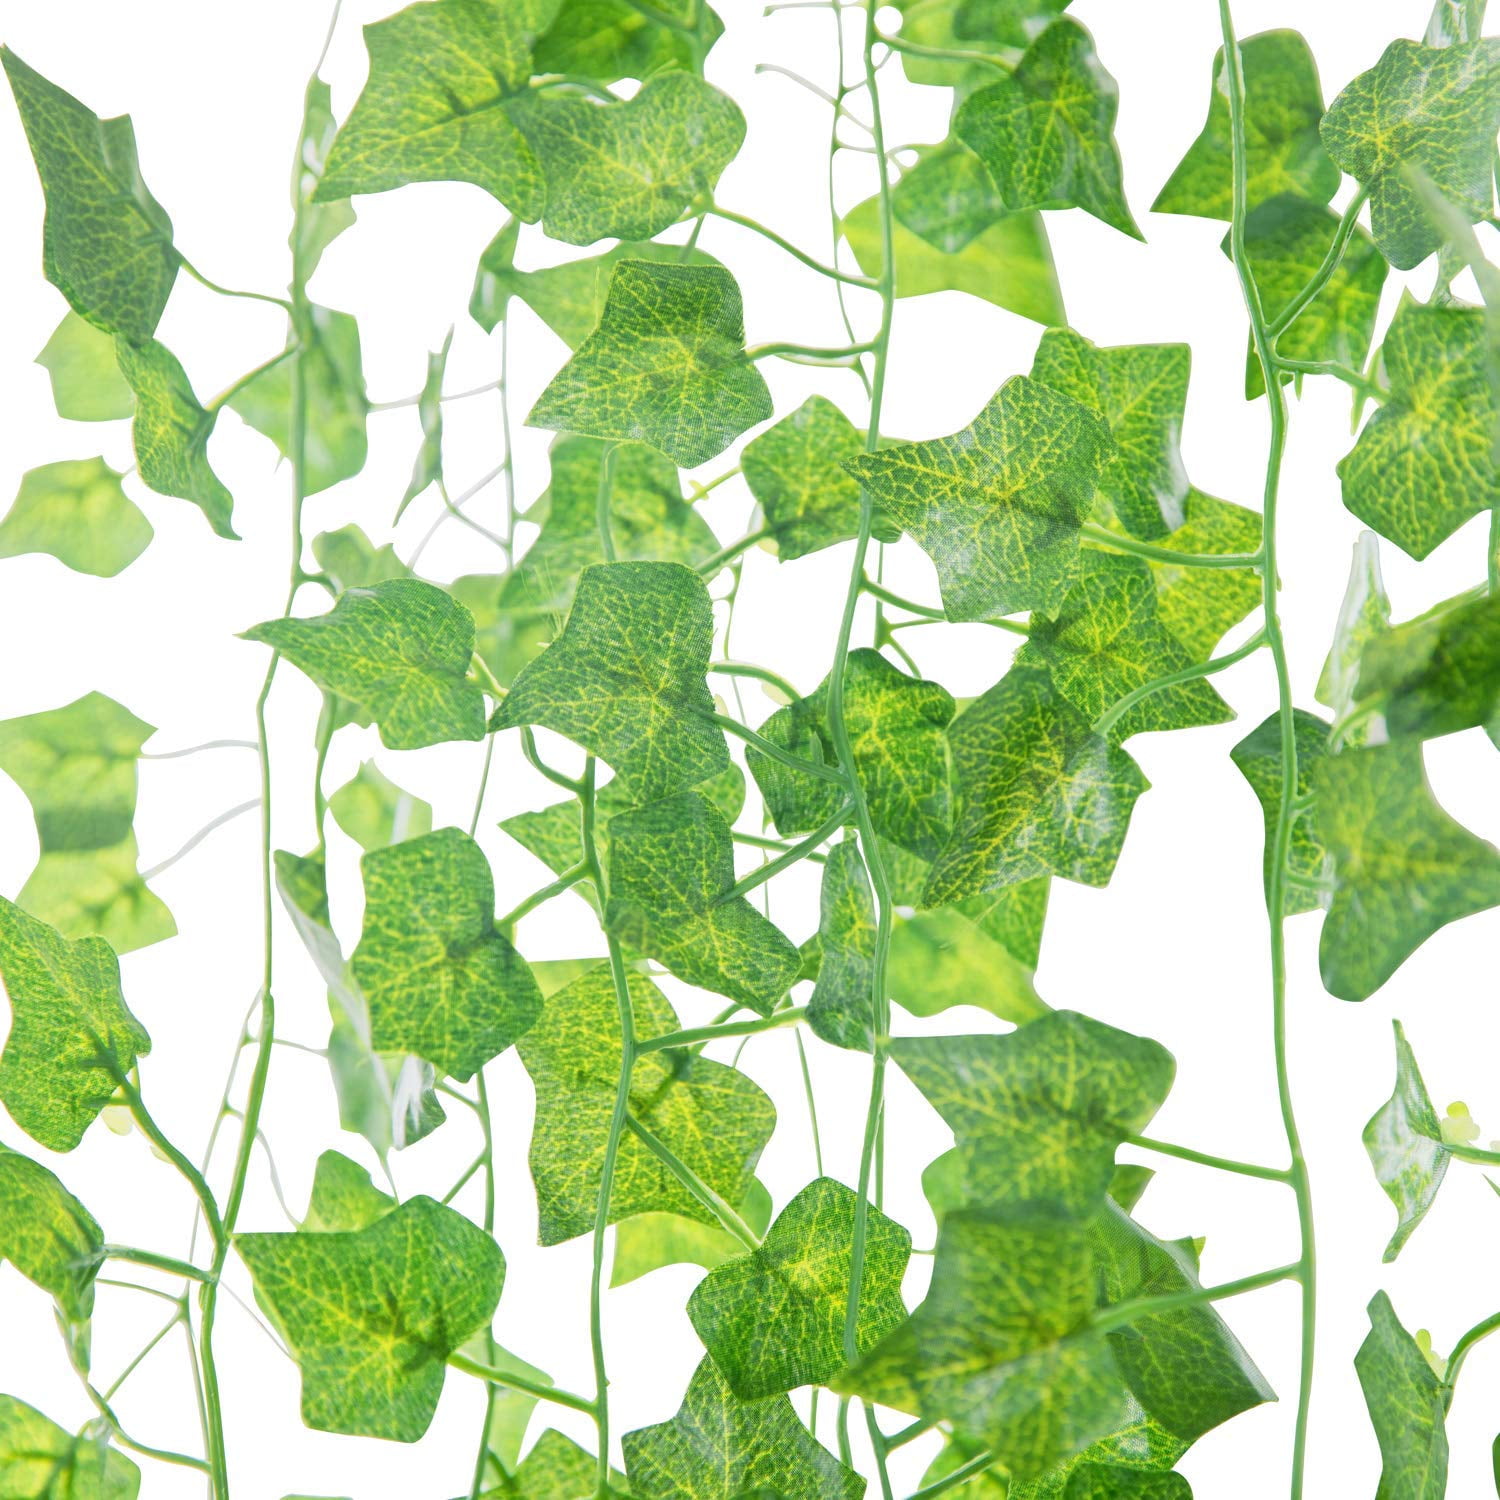 36/72X Artificial Fake Leaves Decor Ivy Vine Garland Green Plant Room Party Palm 